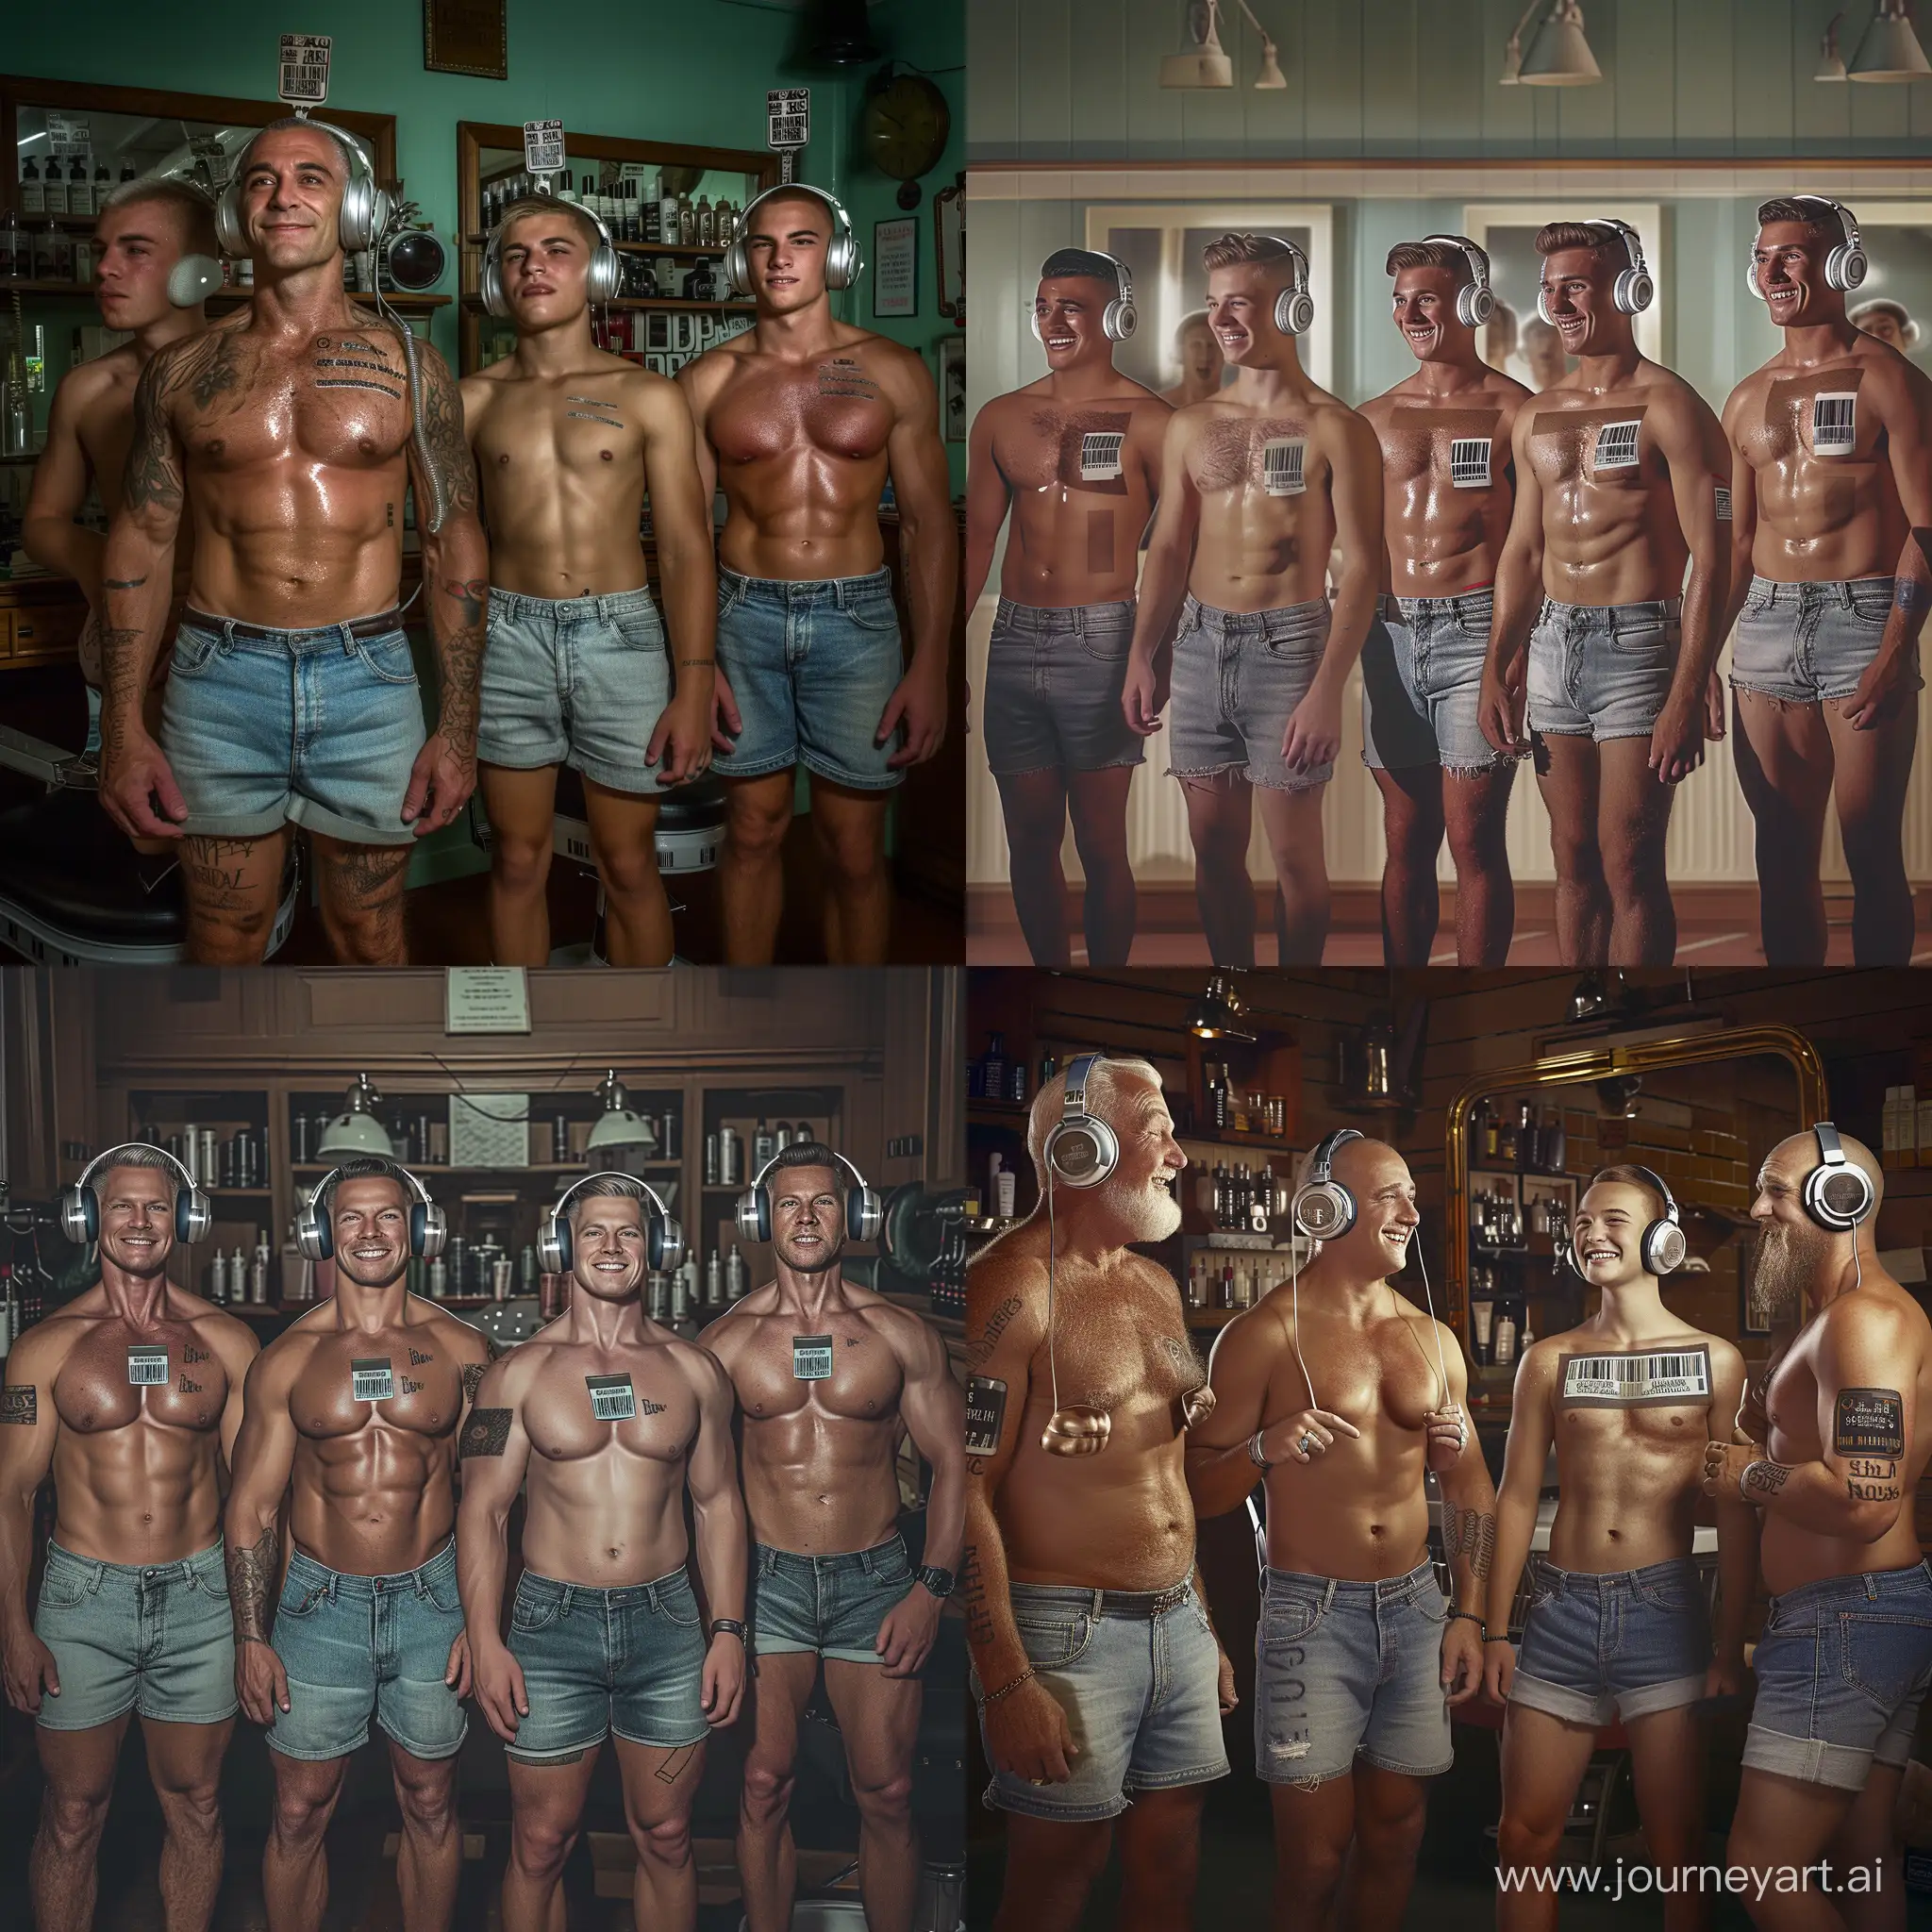 Handsome muscular middle-aged men and handsome muscular college-age boys each wear silver headphones and fitted denim cutoff shorts, dazed smiles, small barcode tattooed on each man's chest, 1950s barbershop setting, facing the viewer, mass indoctrination, color image, hyperrealistic, cinematic

